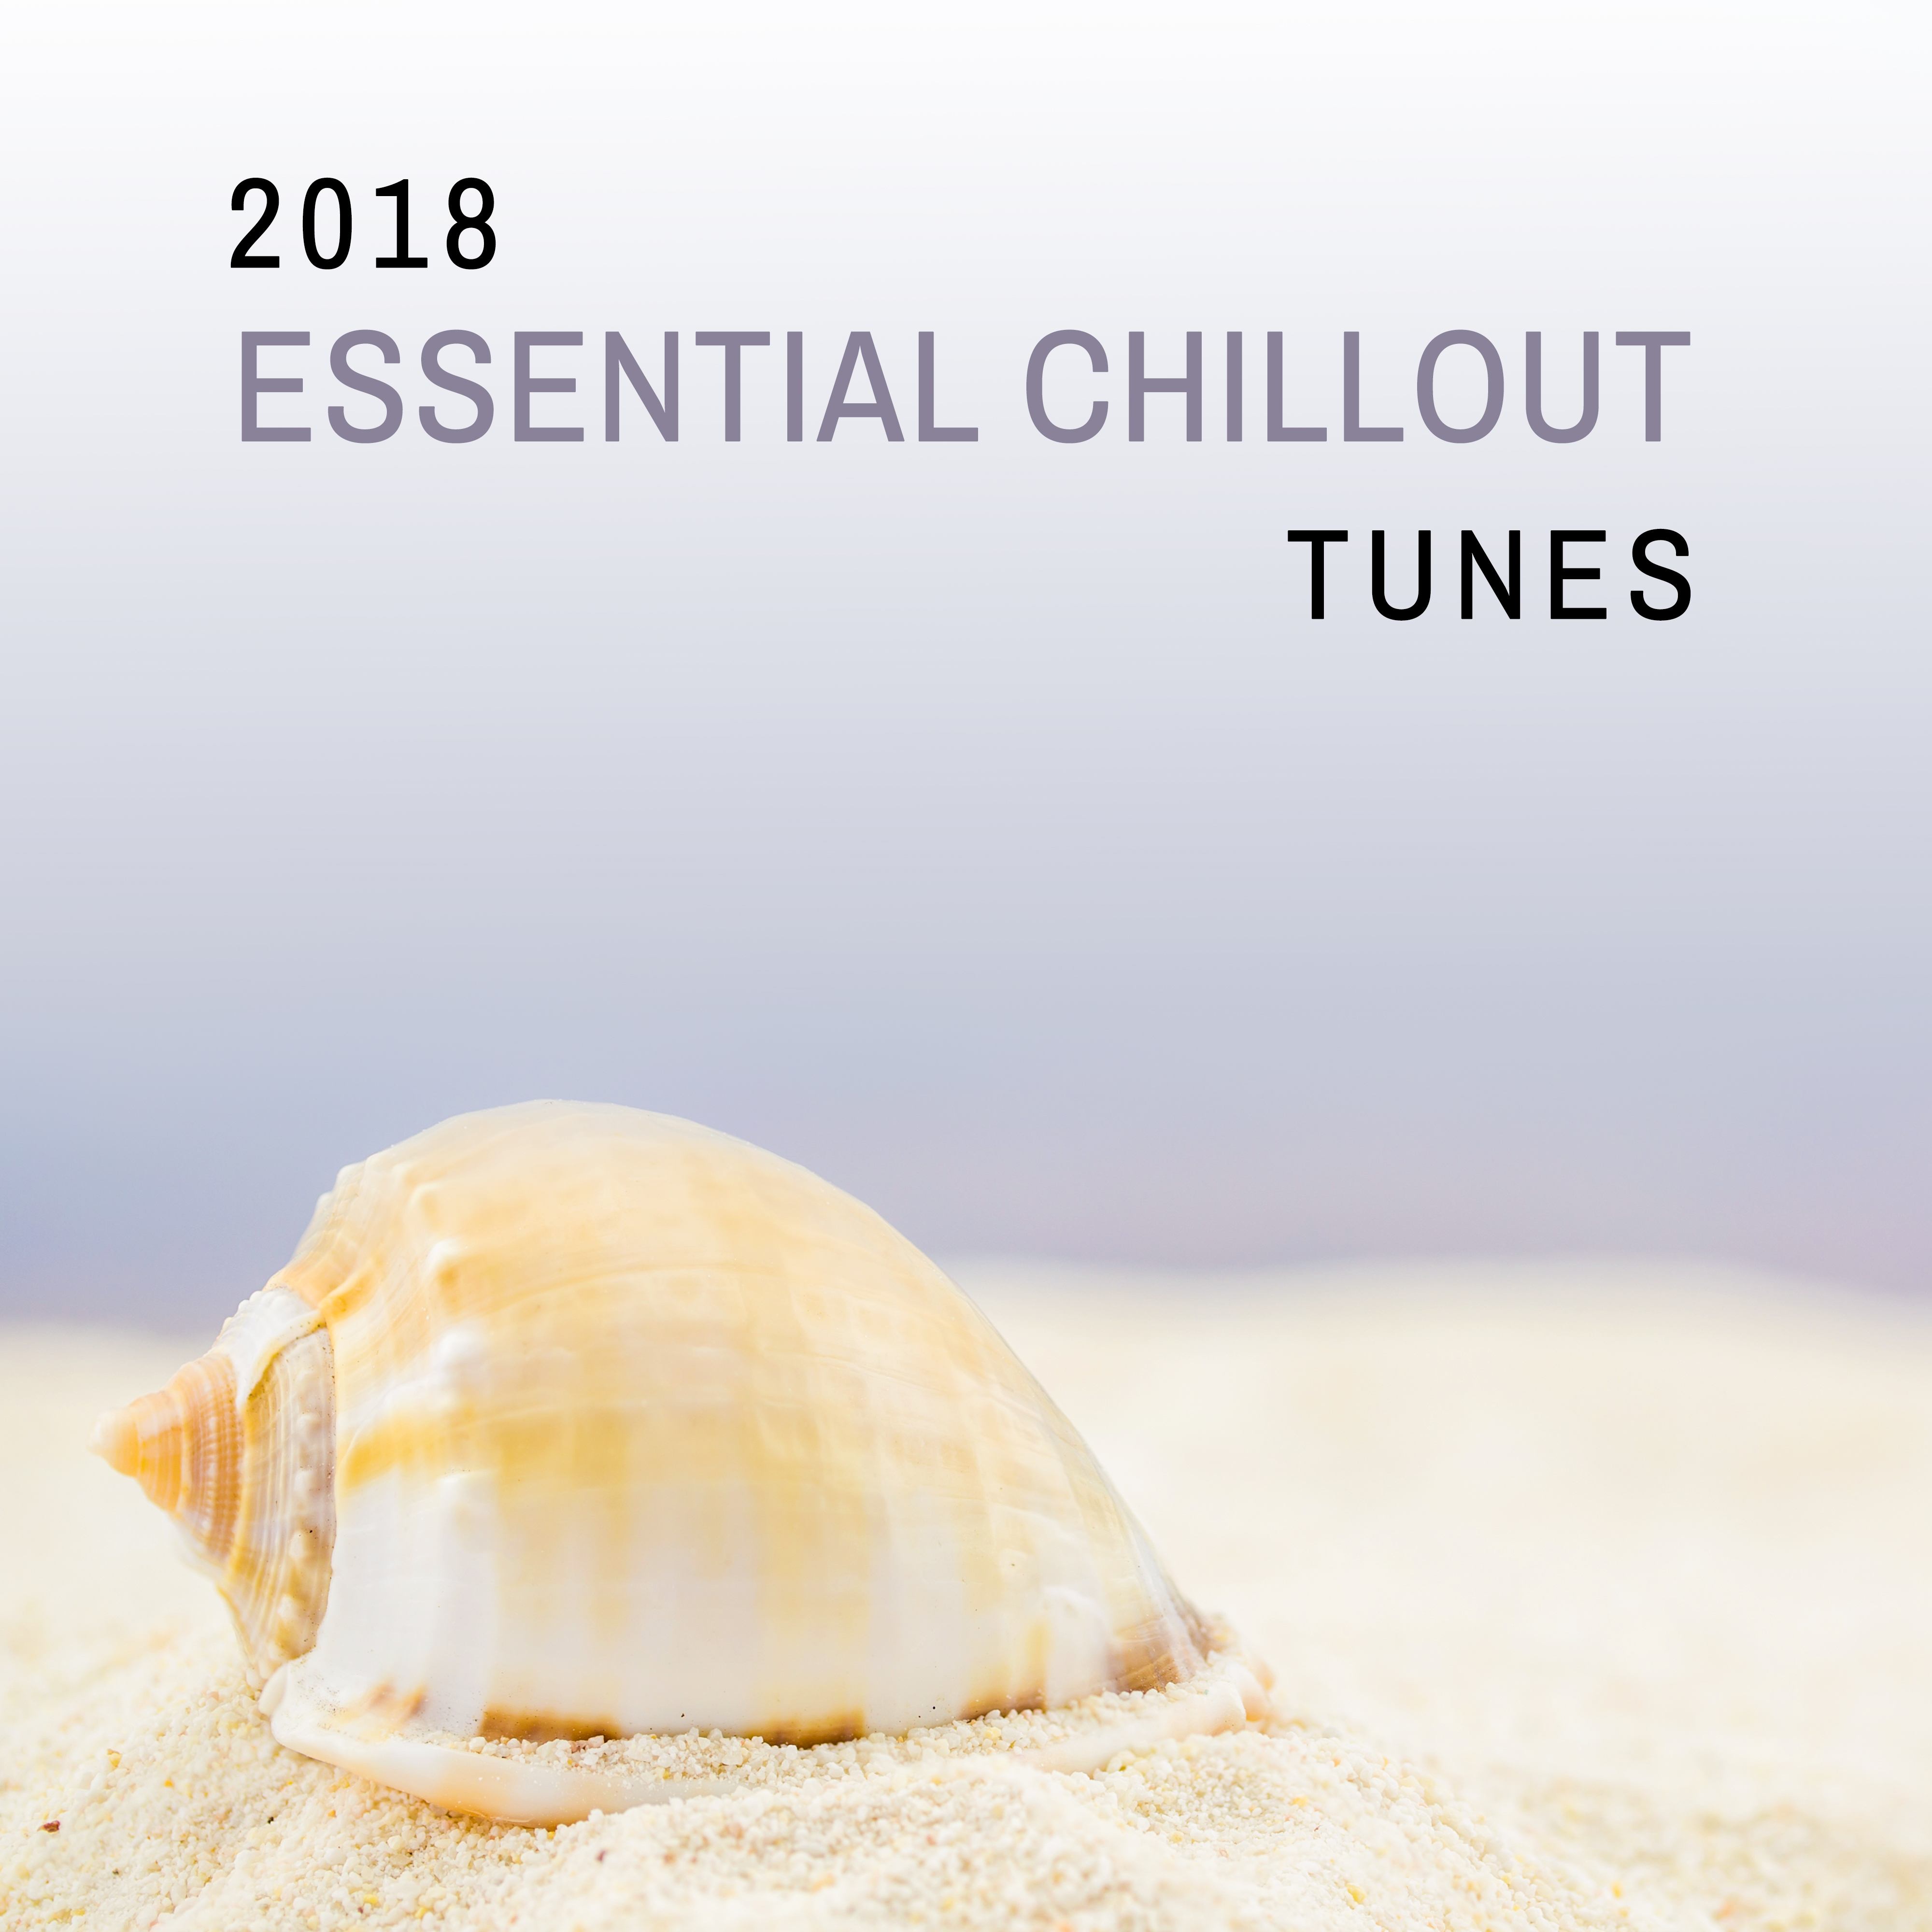 2018 Essential Chillout Tunes